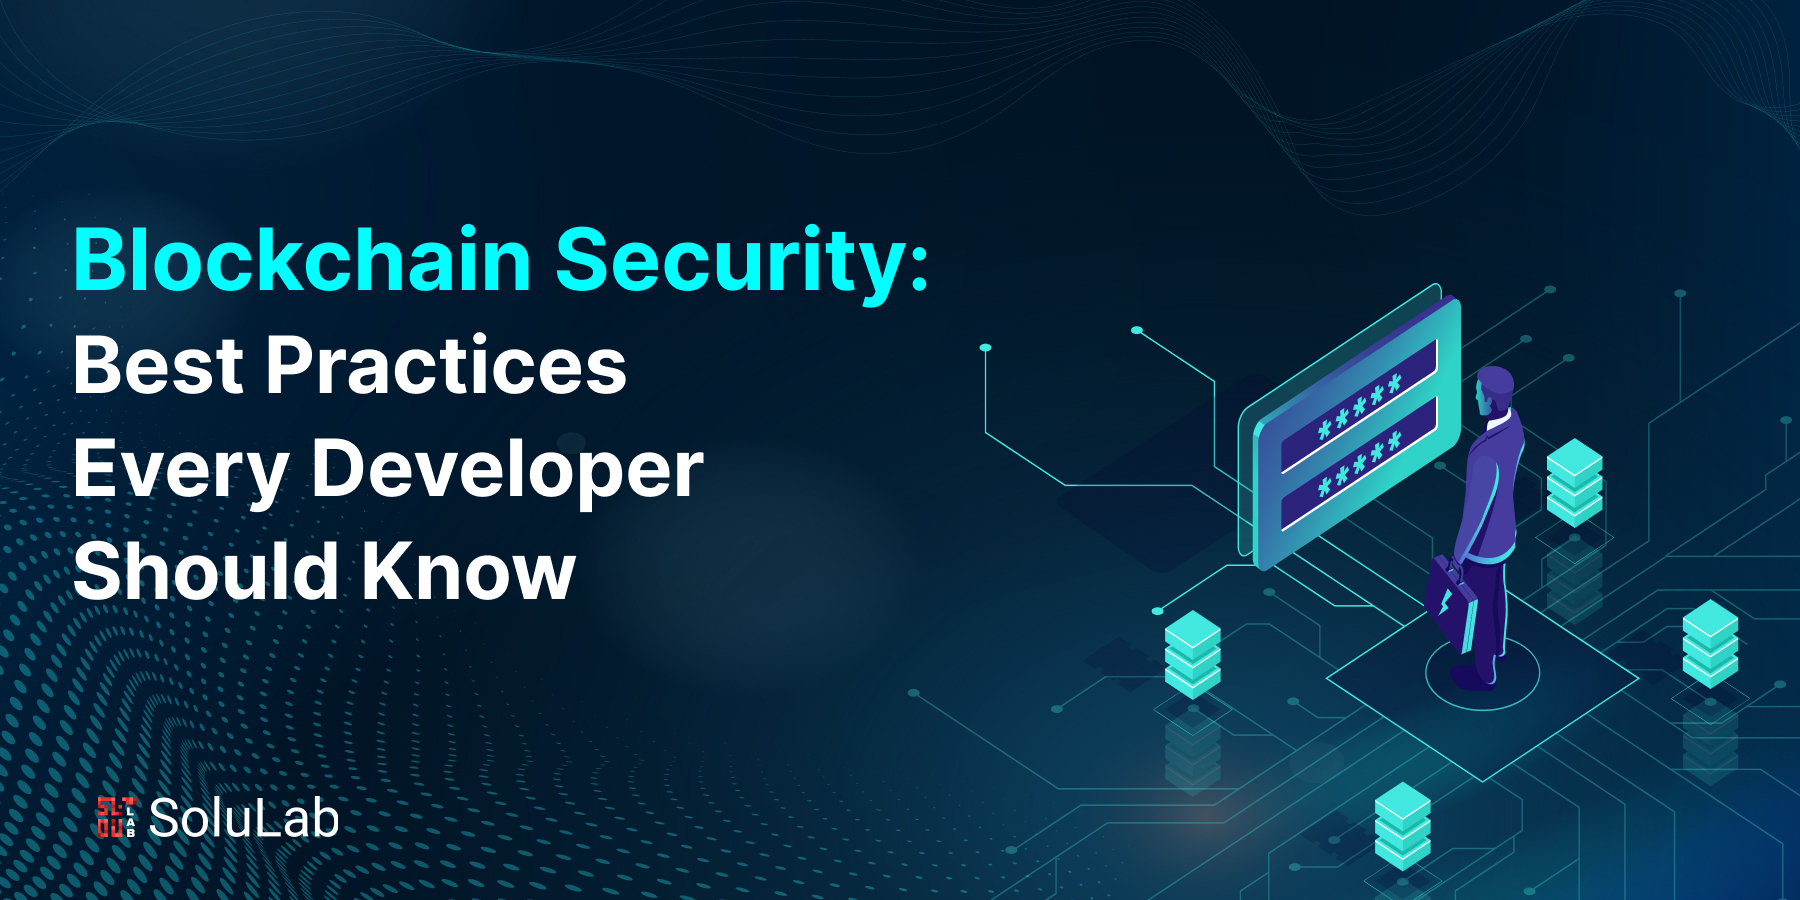 Blockchain Security: Best Practices Every Developer Should Know